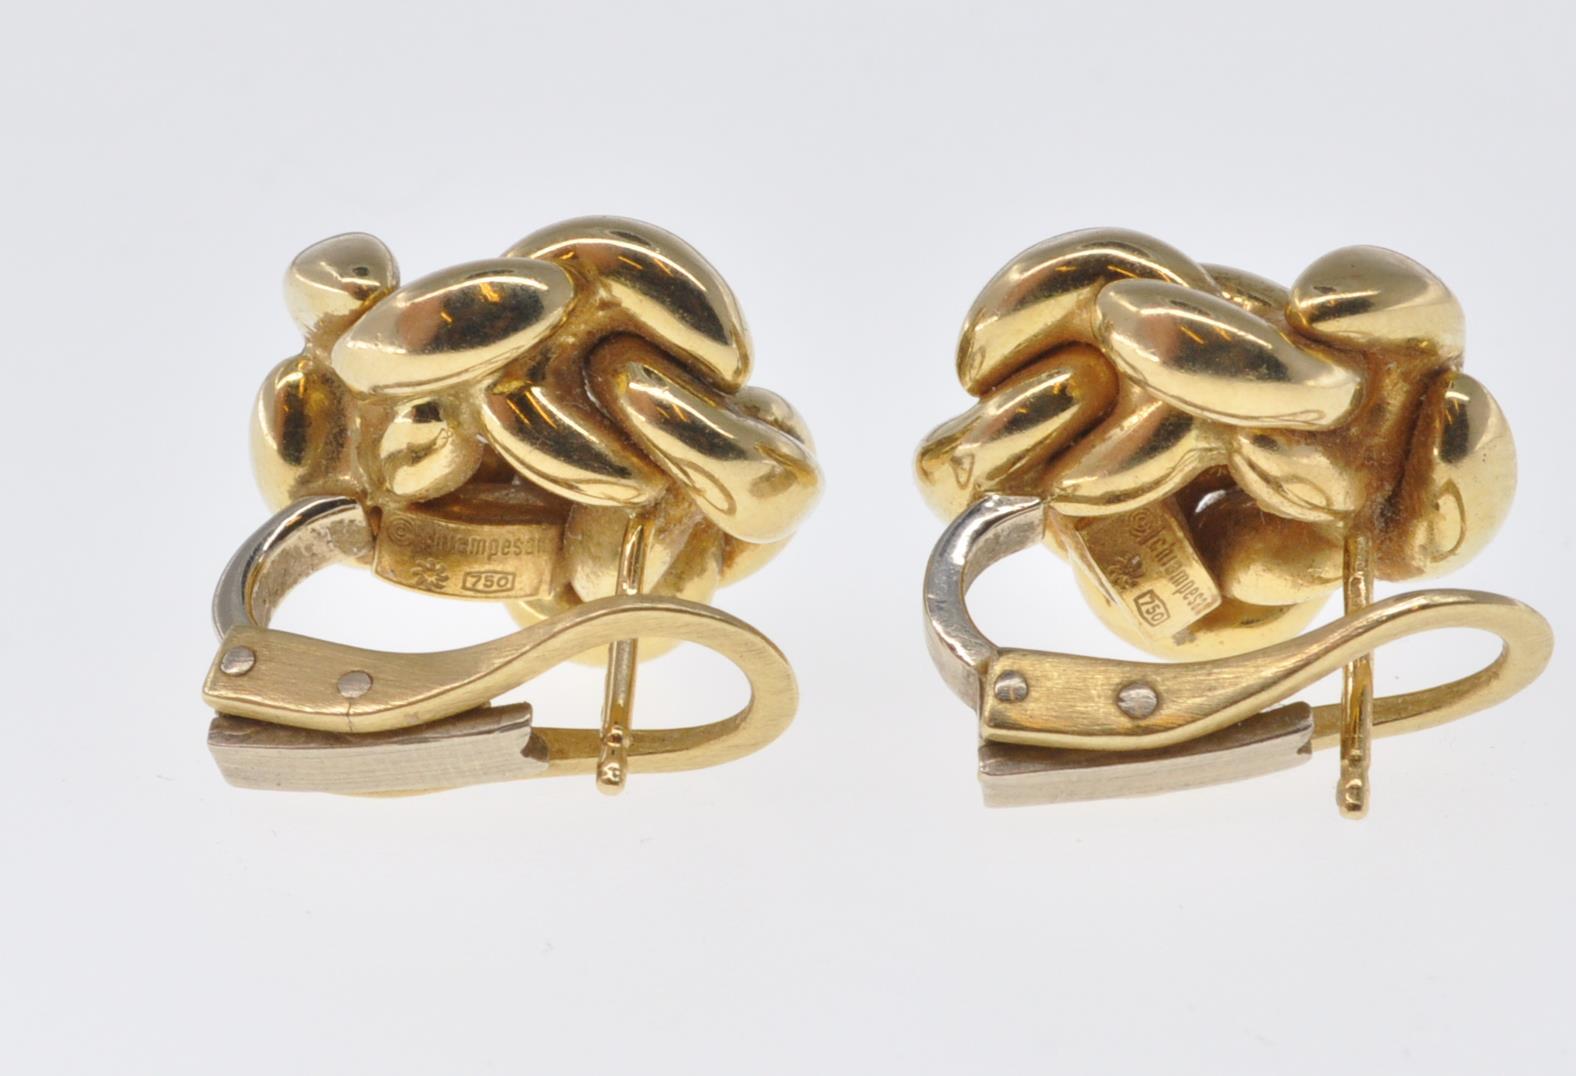 PAIR OF VINTAGE 18CT GOLD KNOT DESIGN STUD EARRINGS - Image 3 of 4